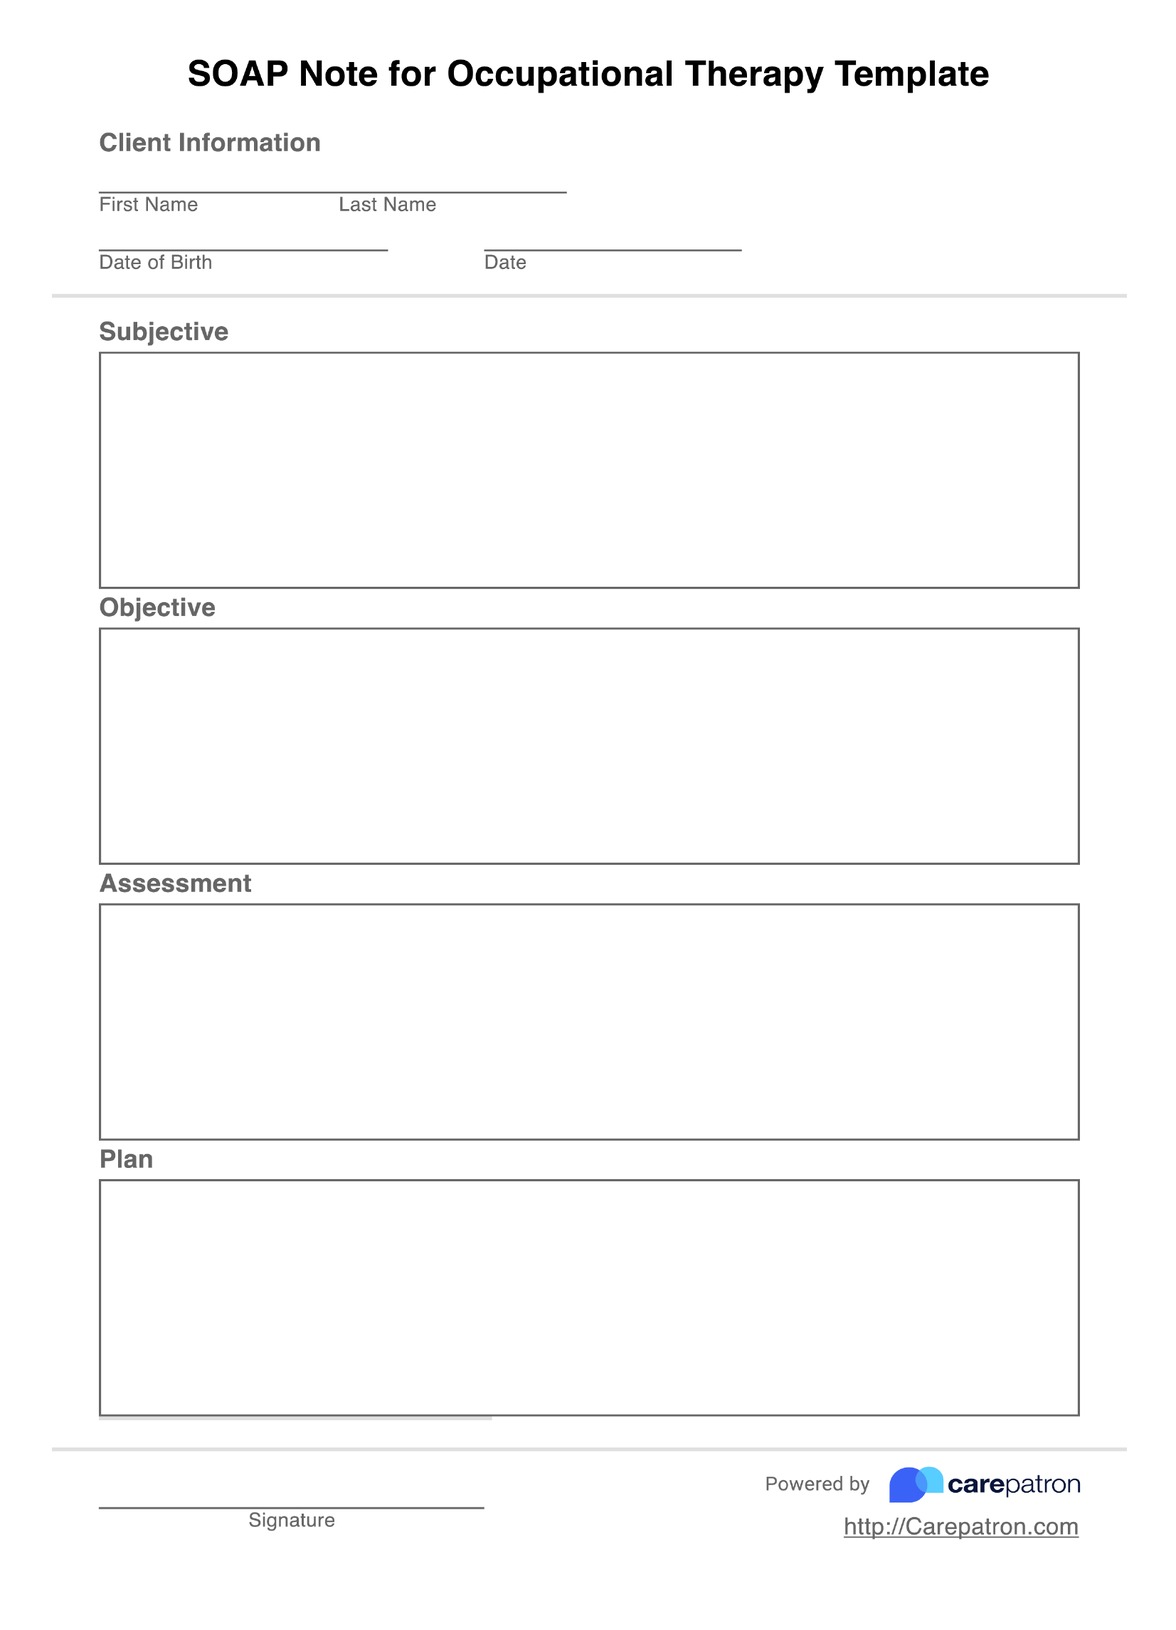 SOAP Notes For Occupational Therapy Template PDF Example